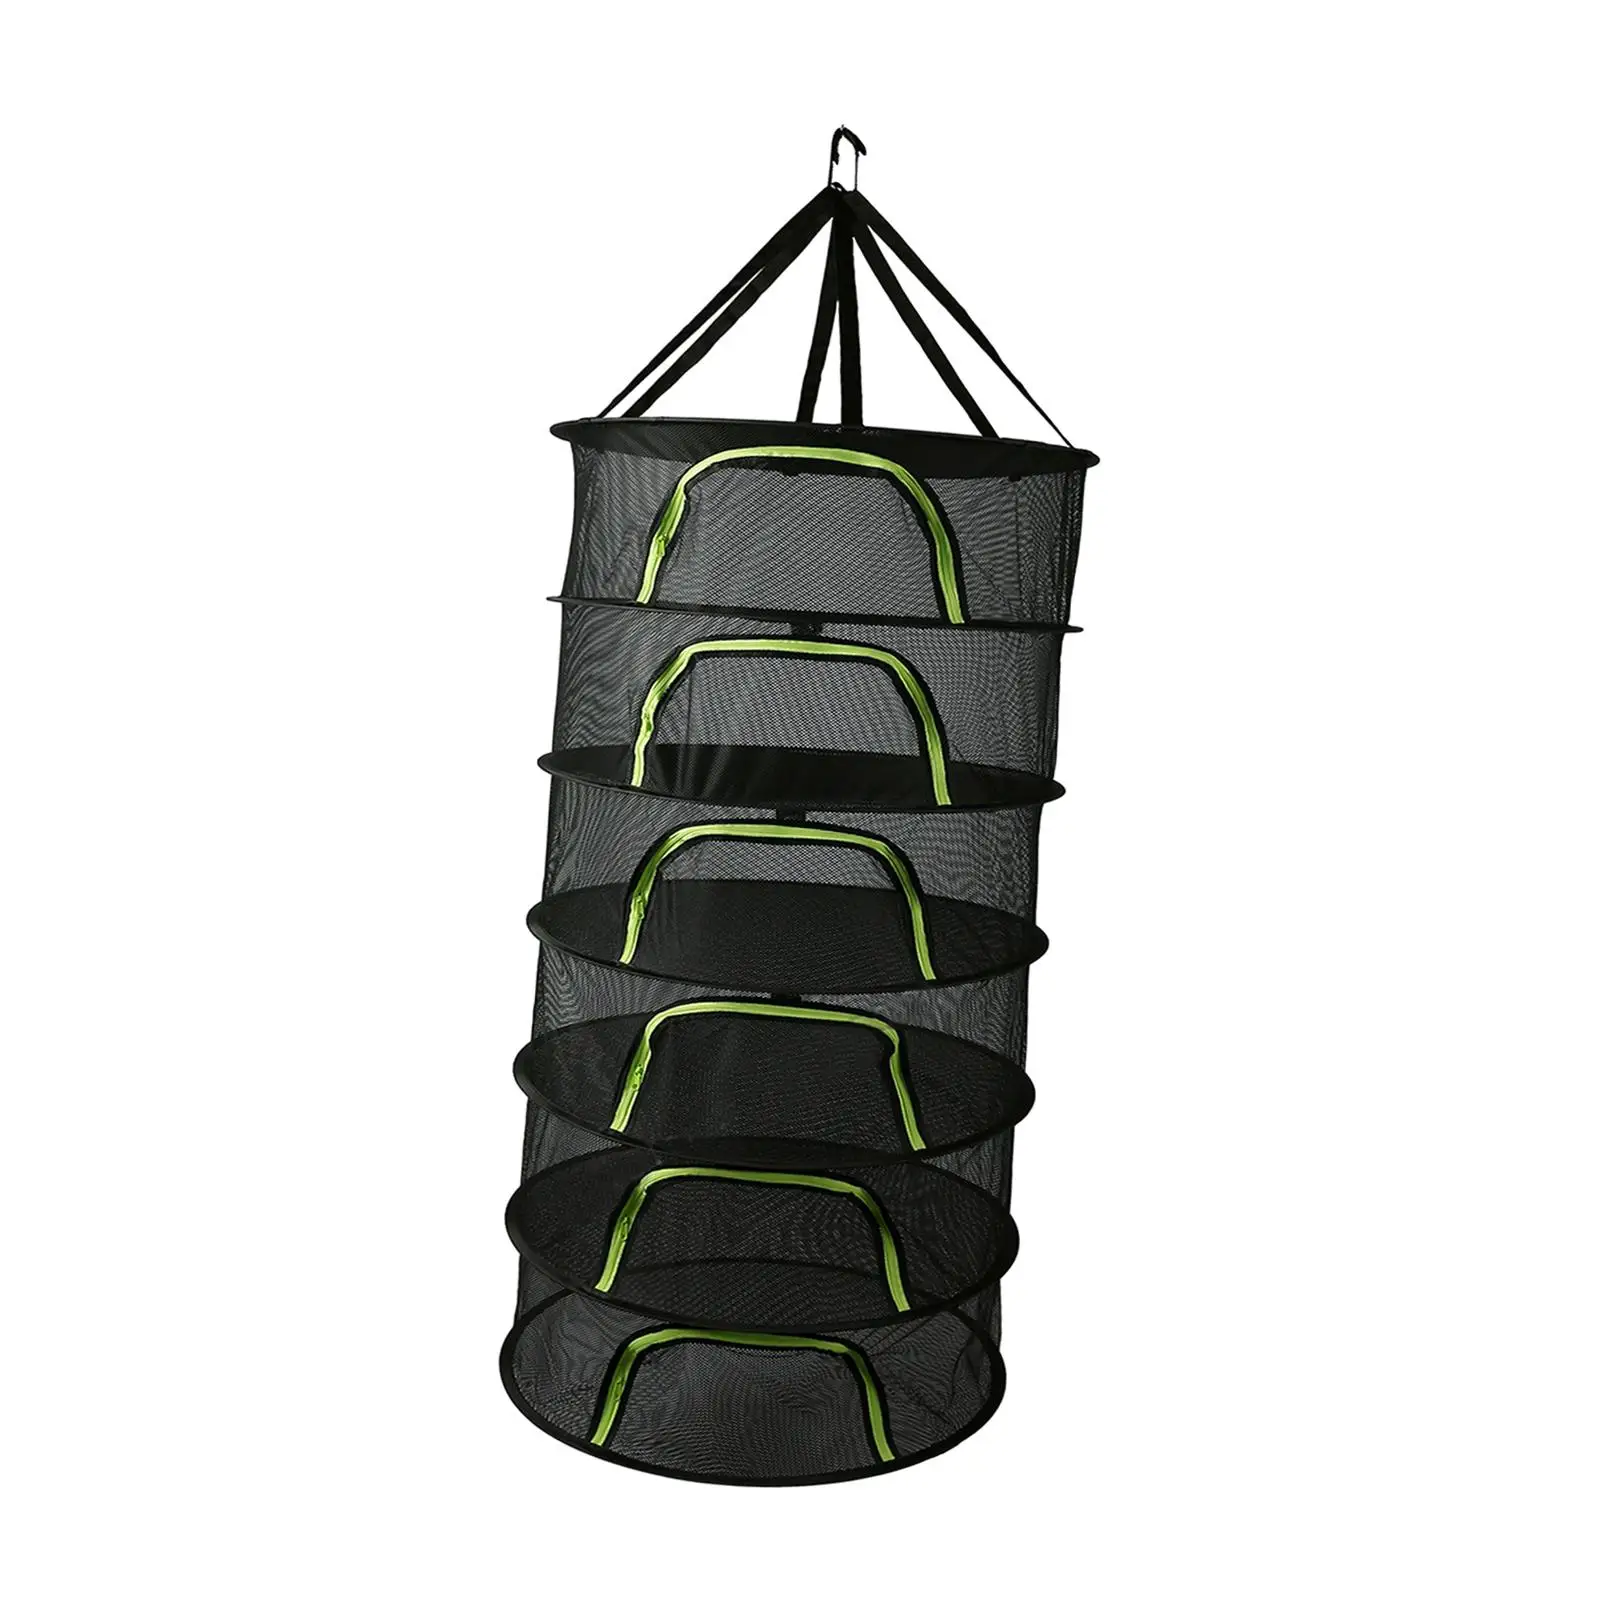 Plants Drying Rack Folding with Zipper Opening Hanging Drying Fish Net Hanging Mesh Dryer for Tea Clothes Flowers Vegetables